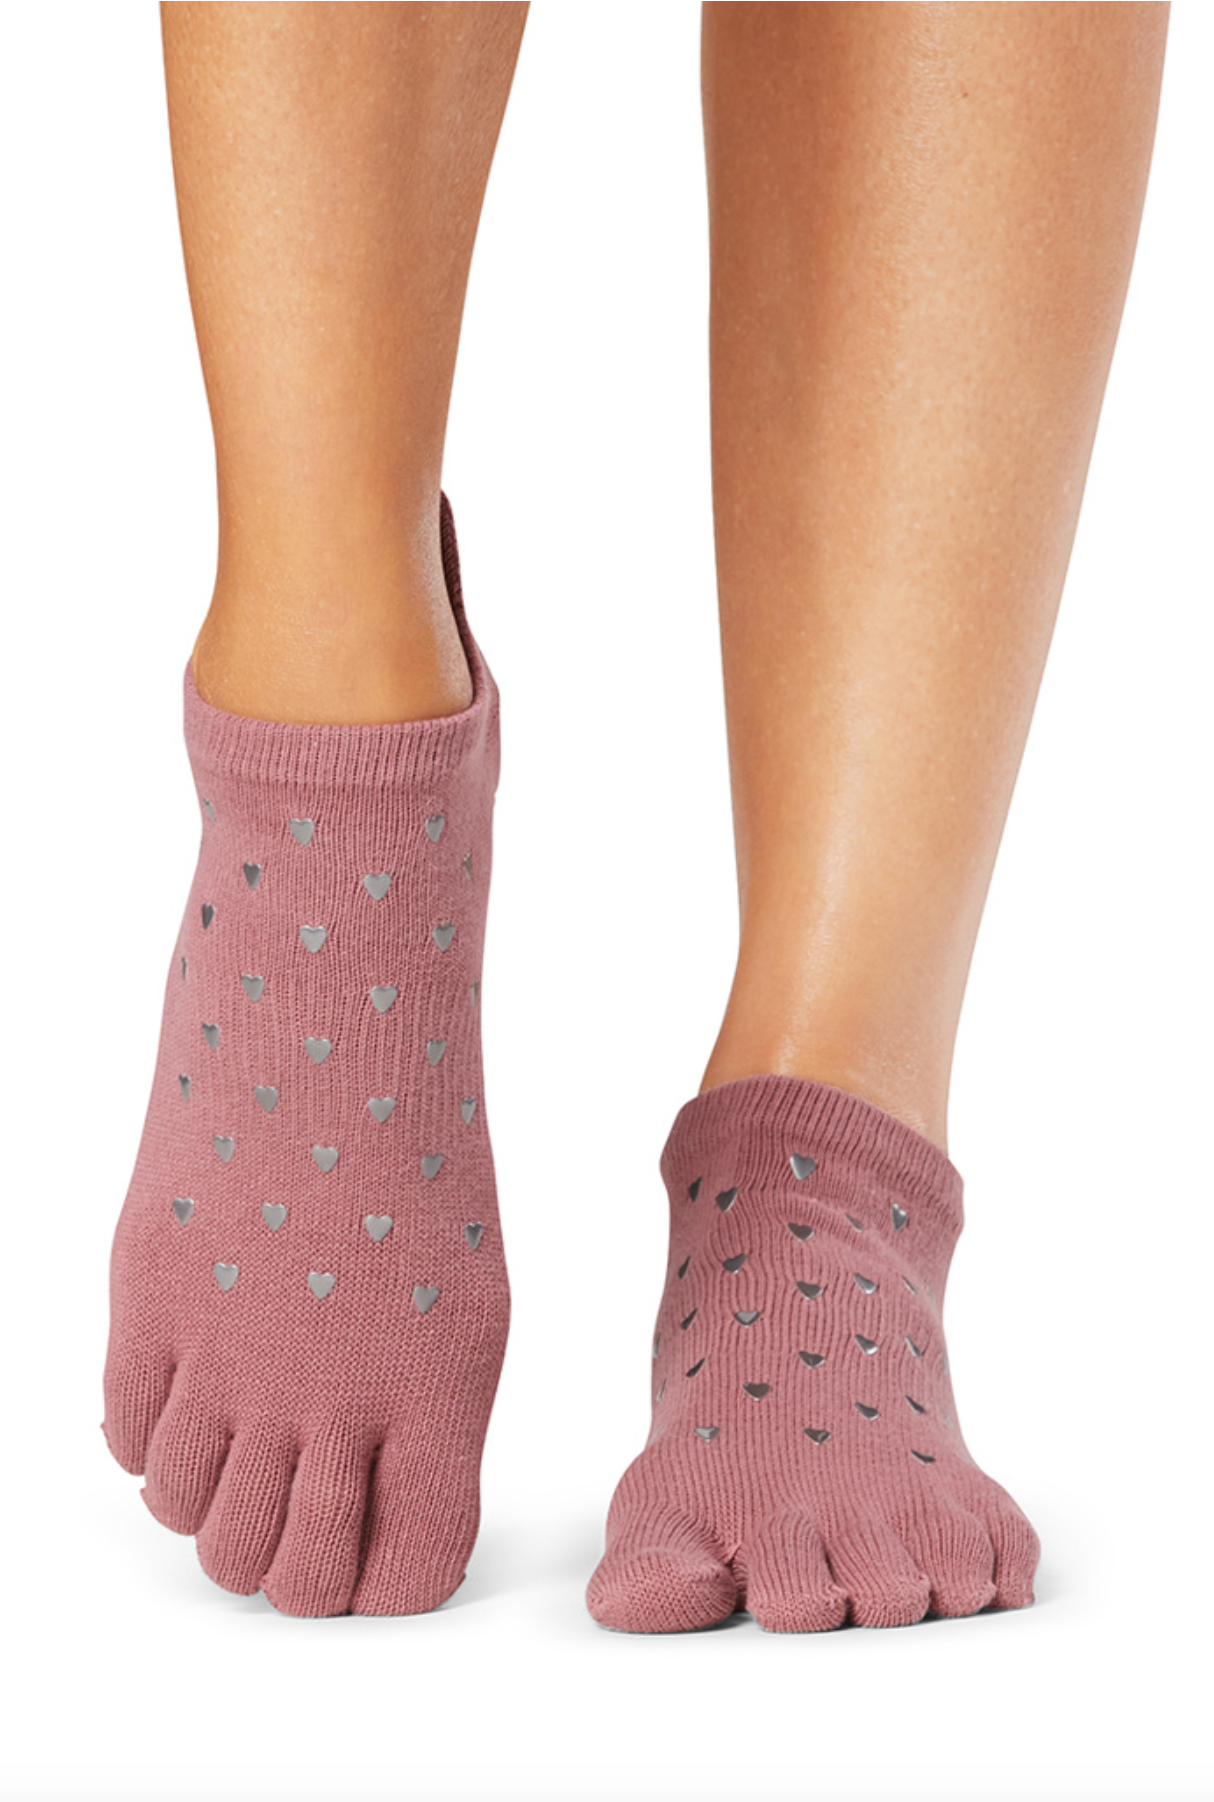 ToeSox Low Rise Full toe - mauve toe socks with metallic grey heart print, gripper sole, perfect for pilates and yoga